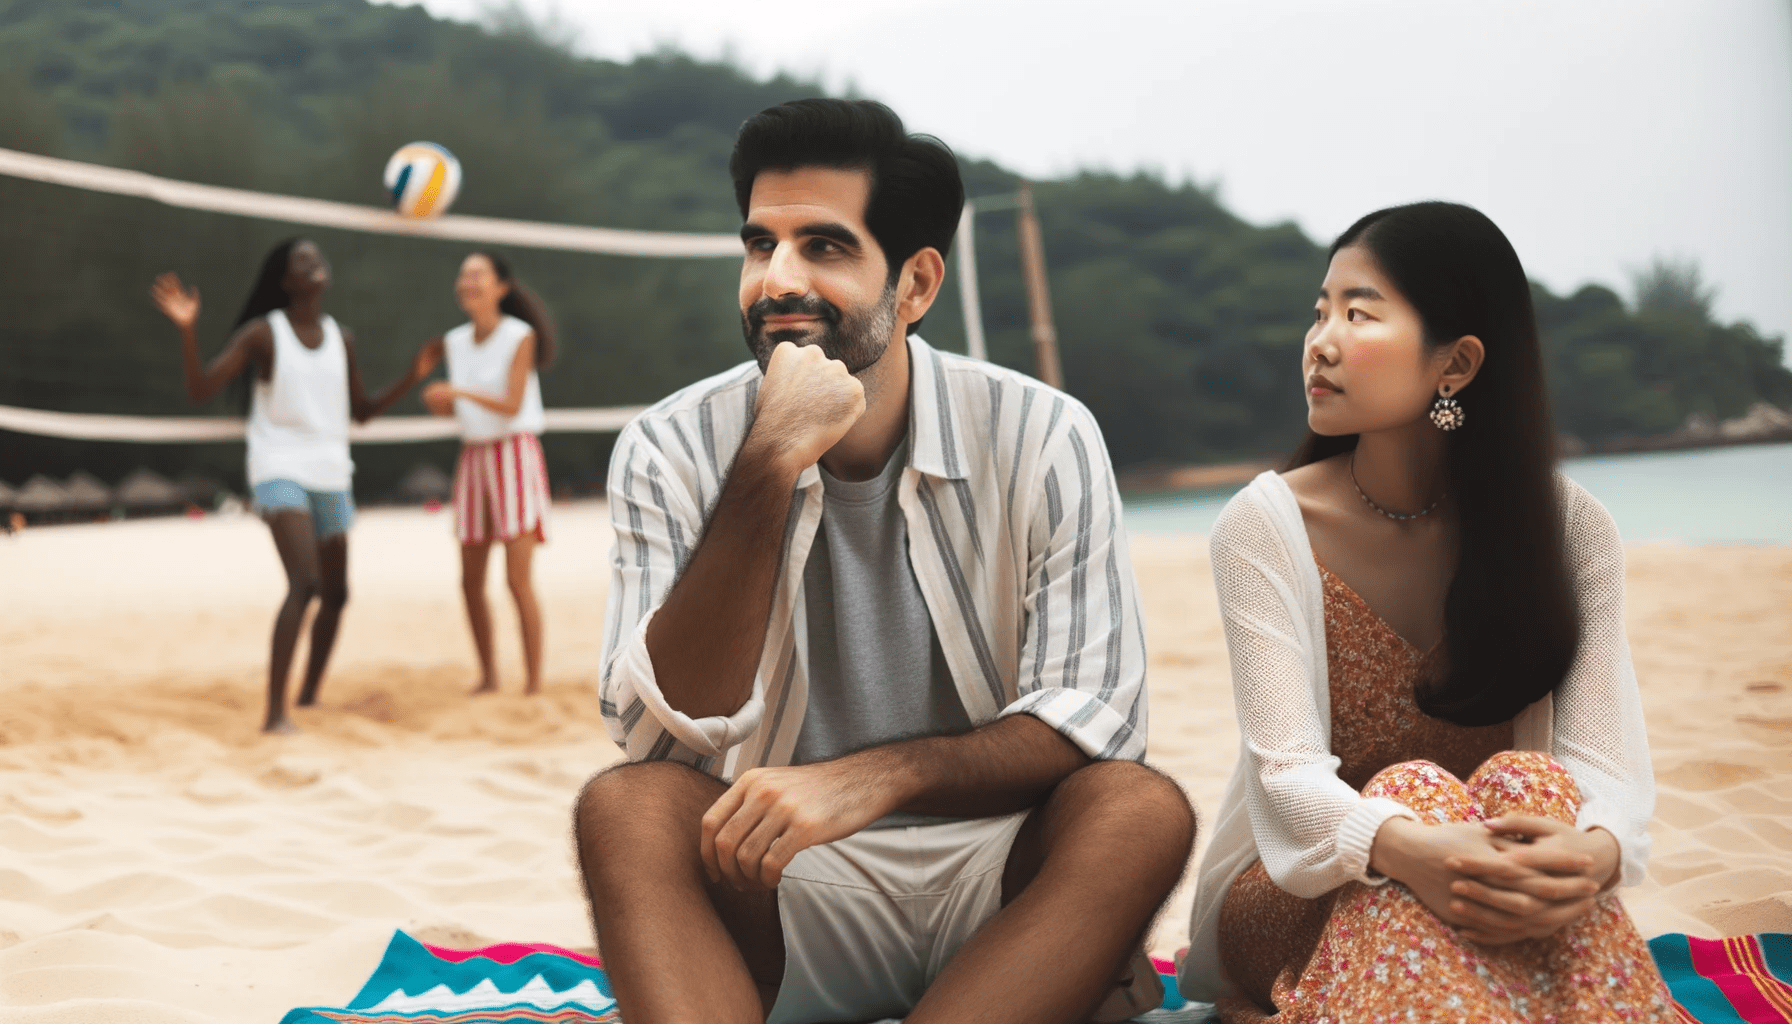 Photo of a diverse group of people at a beach. A Hispanic man is seated on a beach towel next to his South Asian girlfriend. Hes subtly checking out